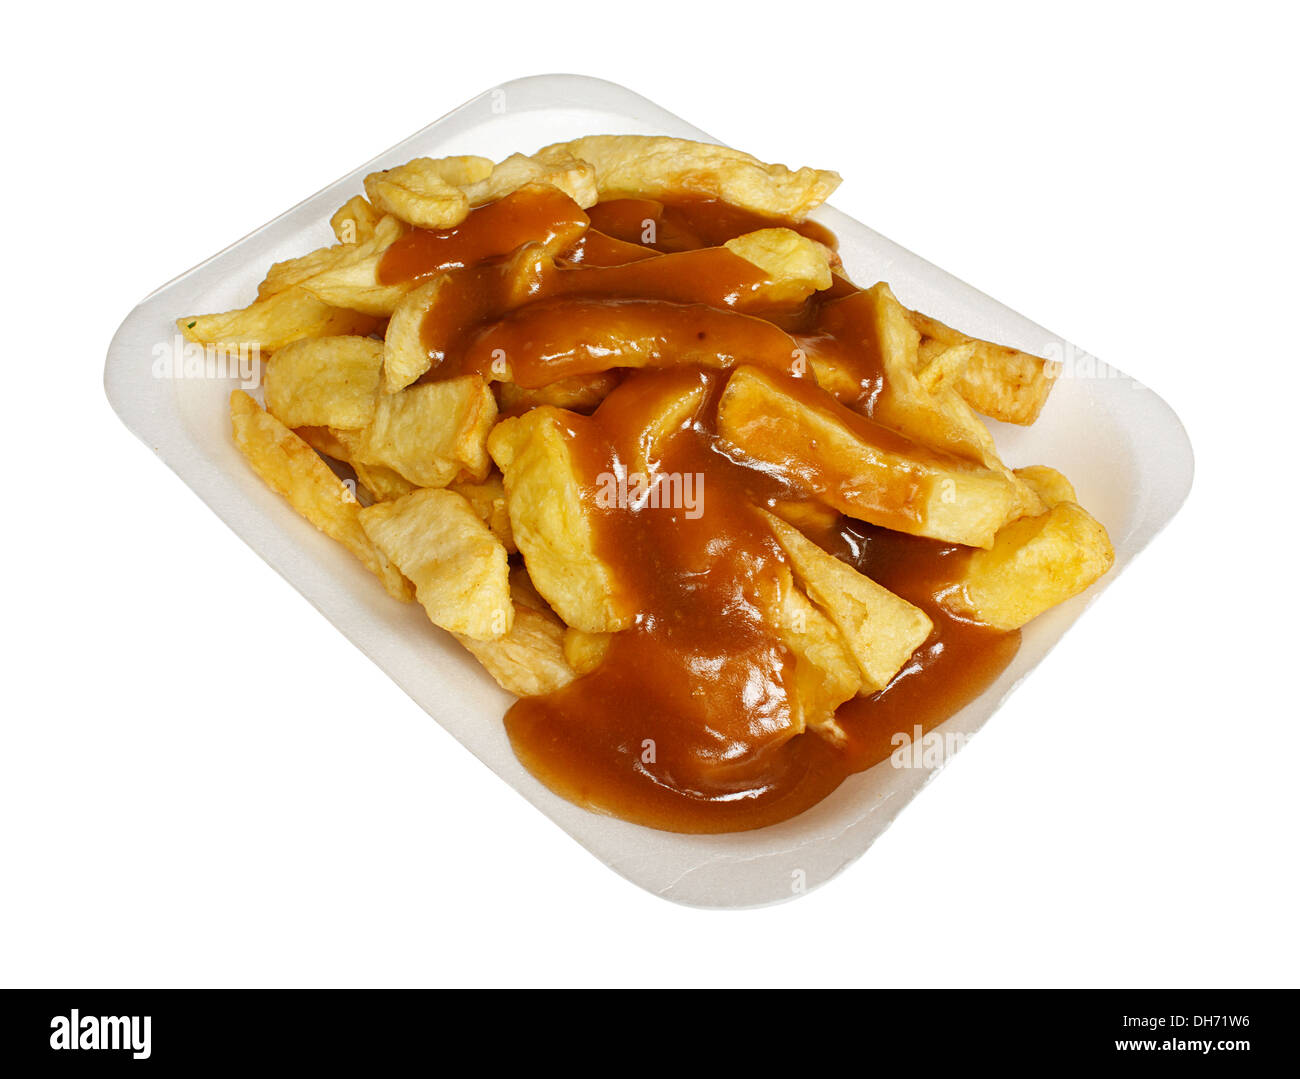 French Fries or Chips and gravy a popular european takeaway snack, served in a polystyrene tray from a take out. Stock Photo